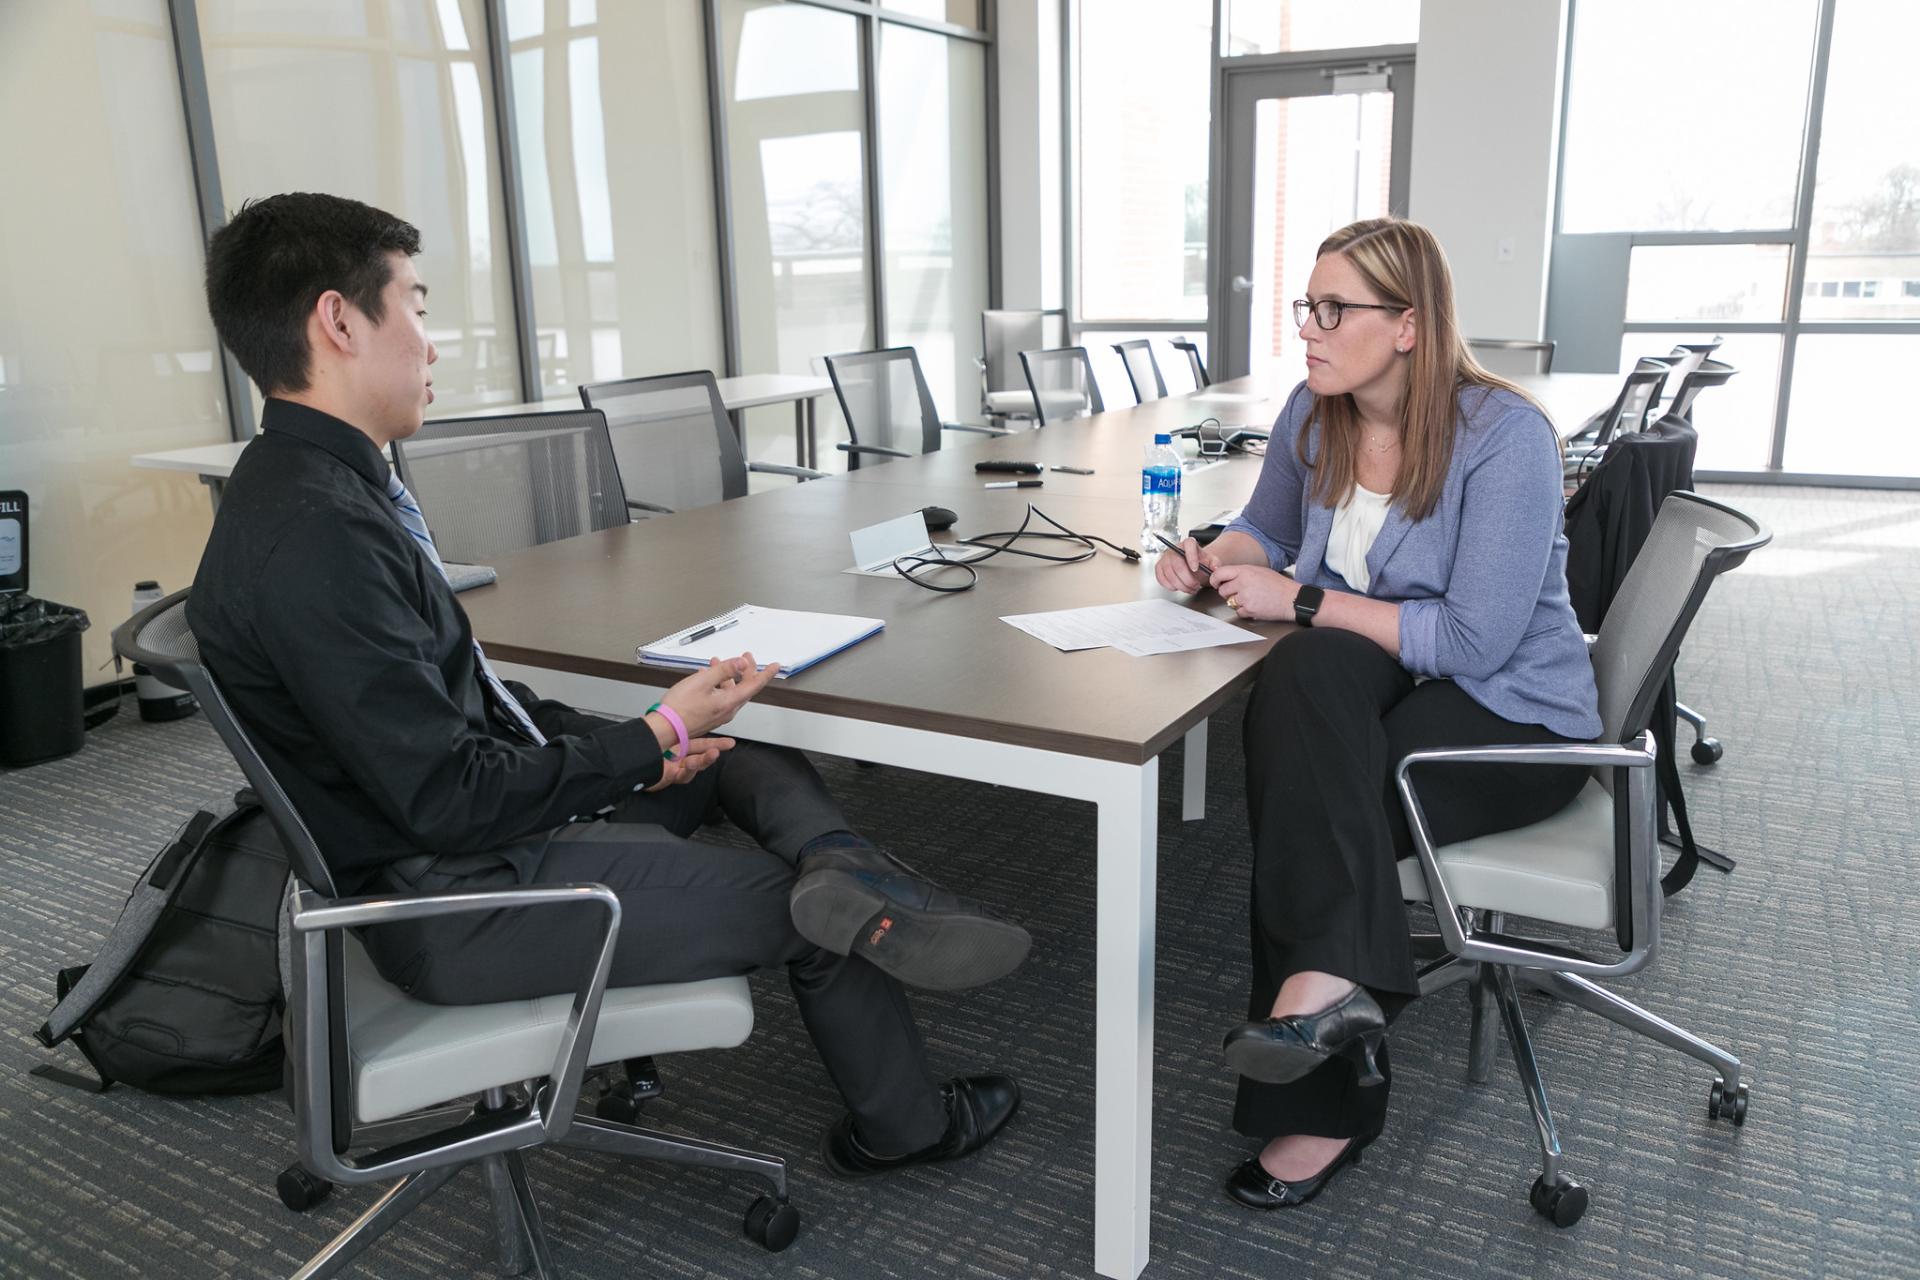 North Central College student Nick Moore talks career planning and interview advice with Katie Dornan.